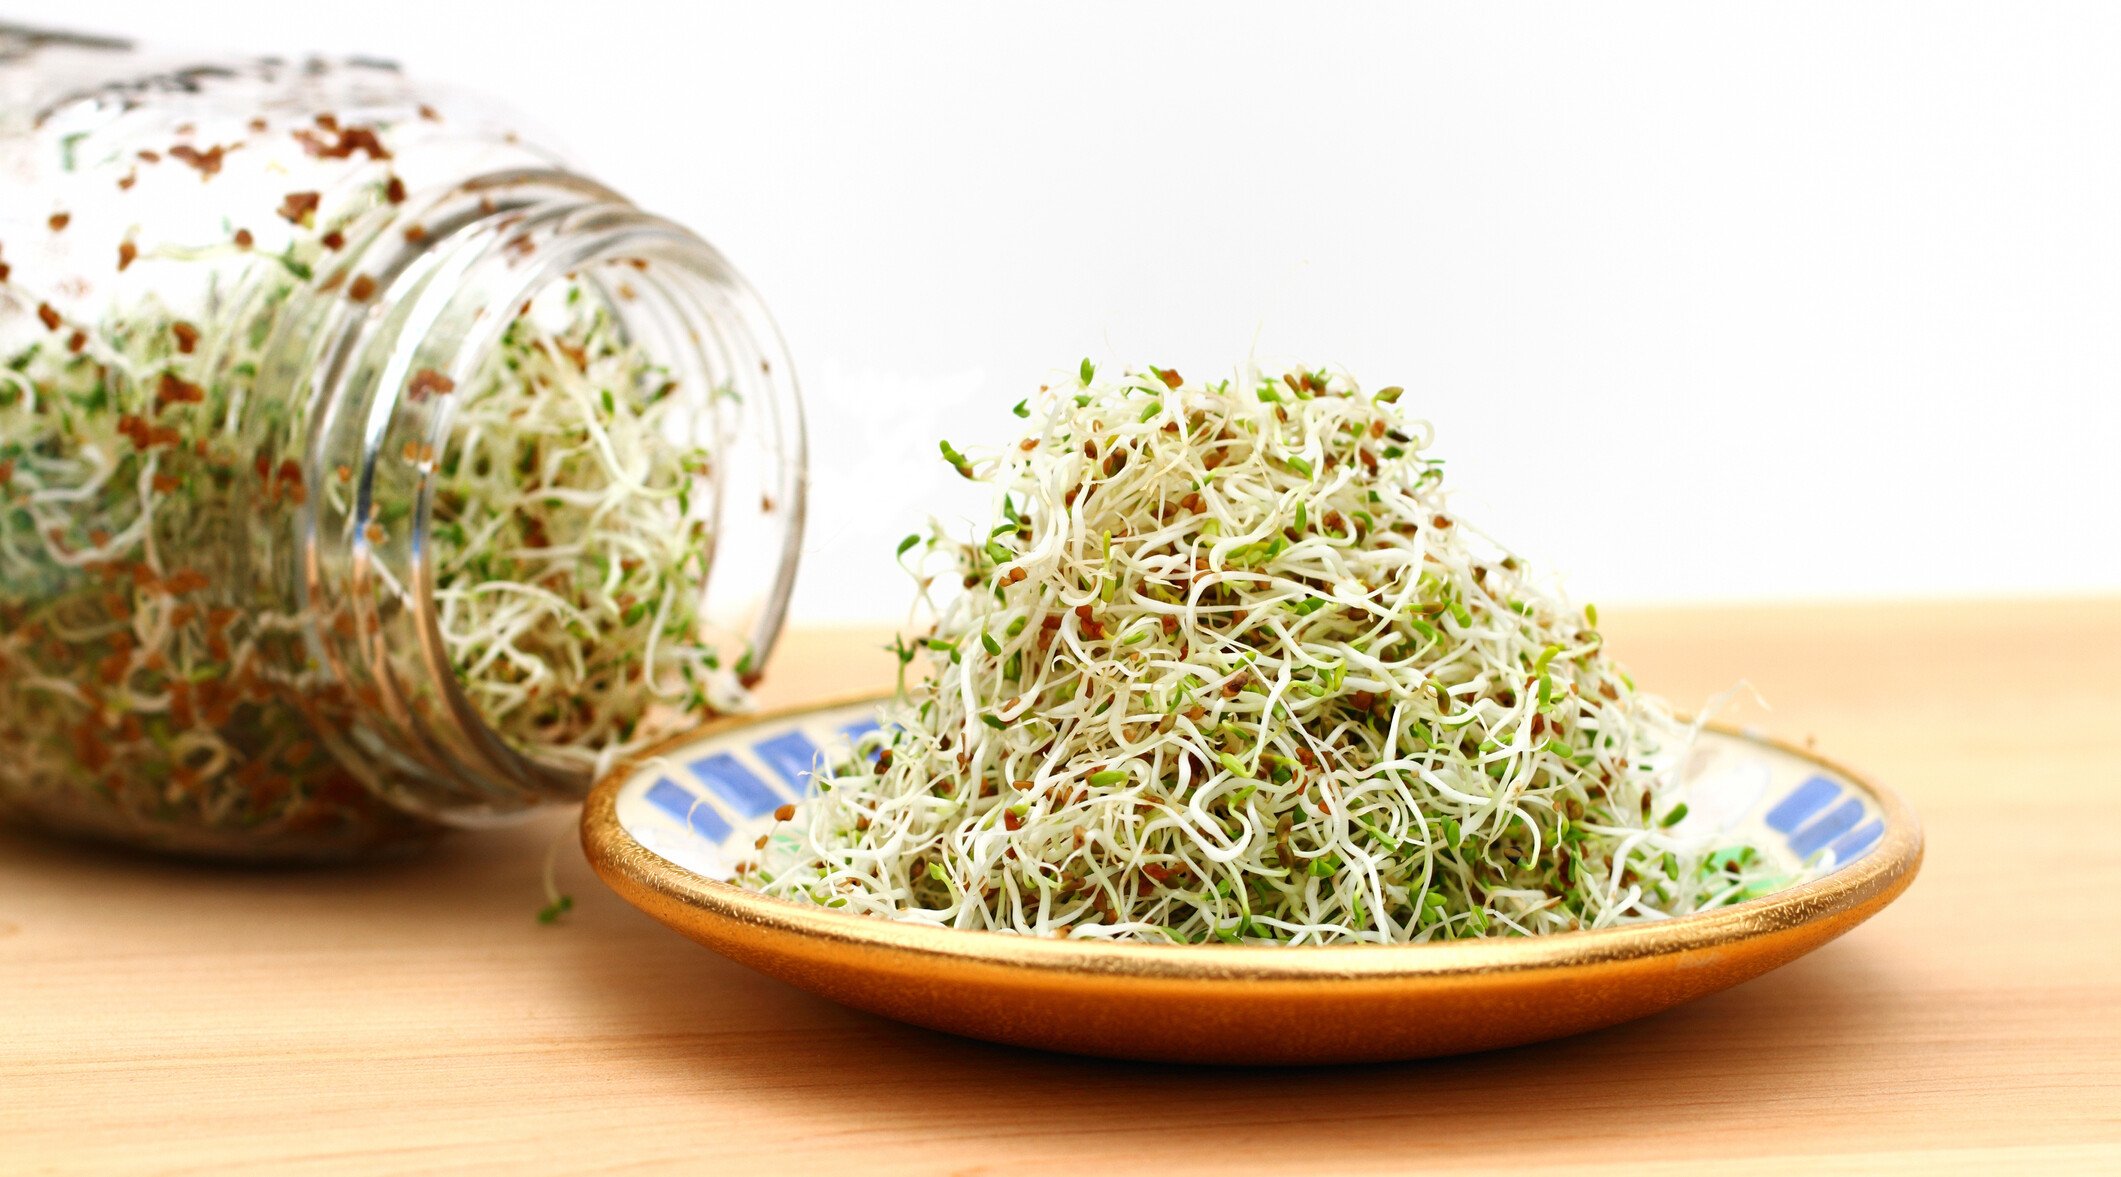 A heap of freshly grown organic alfalfa sprouts is piled on a small saucer. In the background is the sprouting jar with more sprouts.